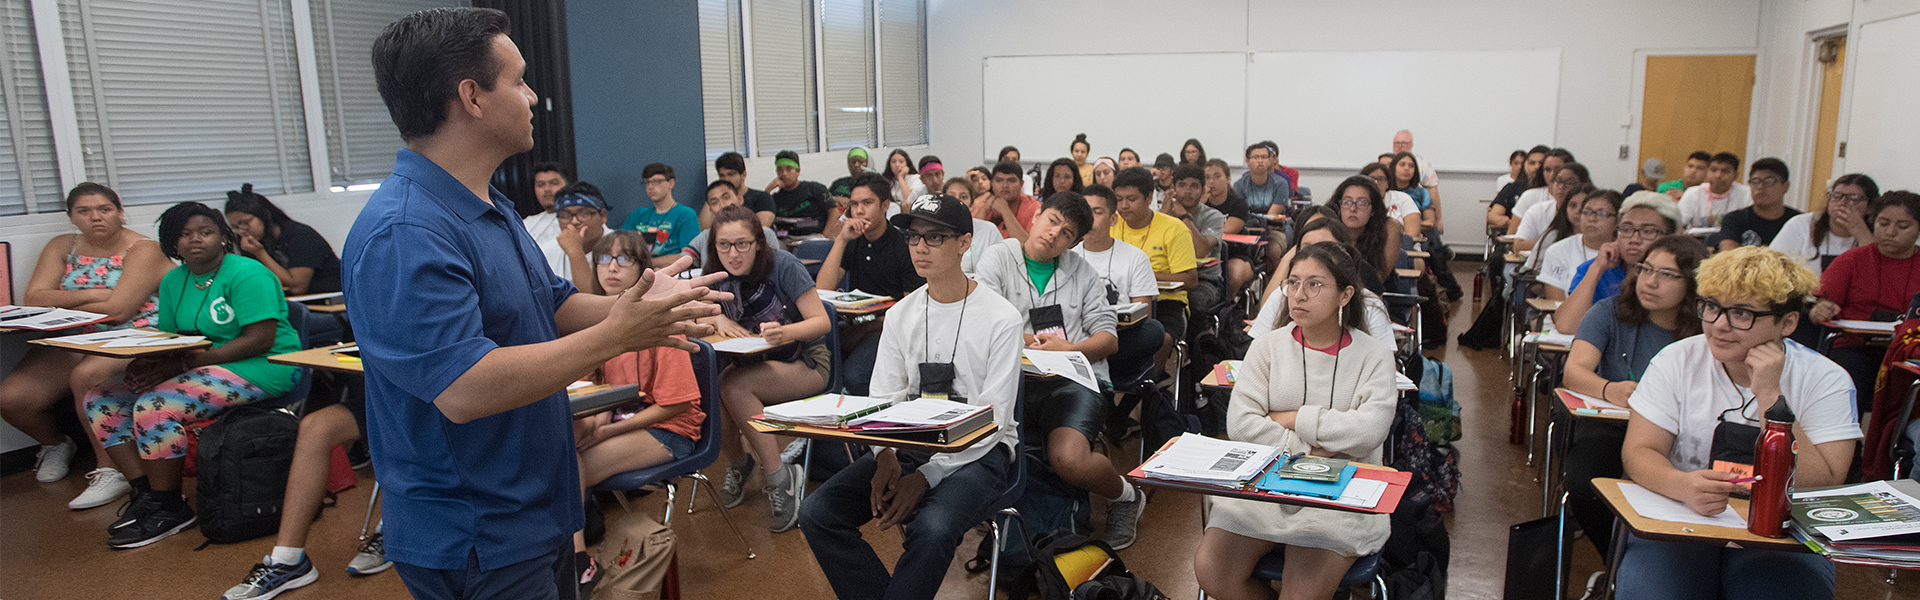 During an Upward Bound summer session in 2018, Professor Steve Alas speaks to high school students about opportunities for underrepresented minorities in science.